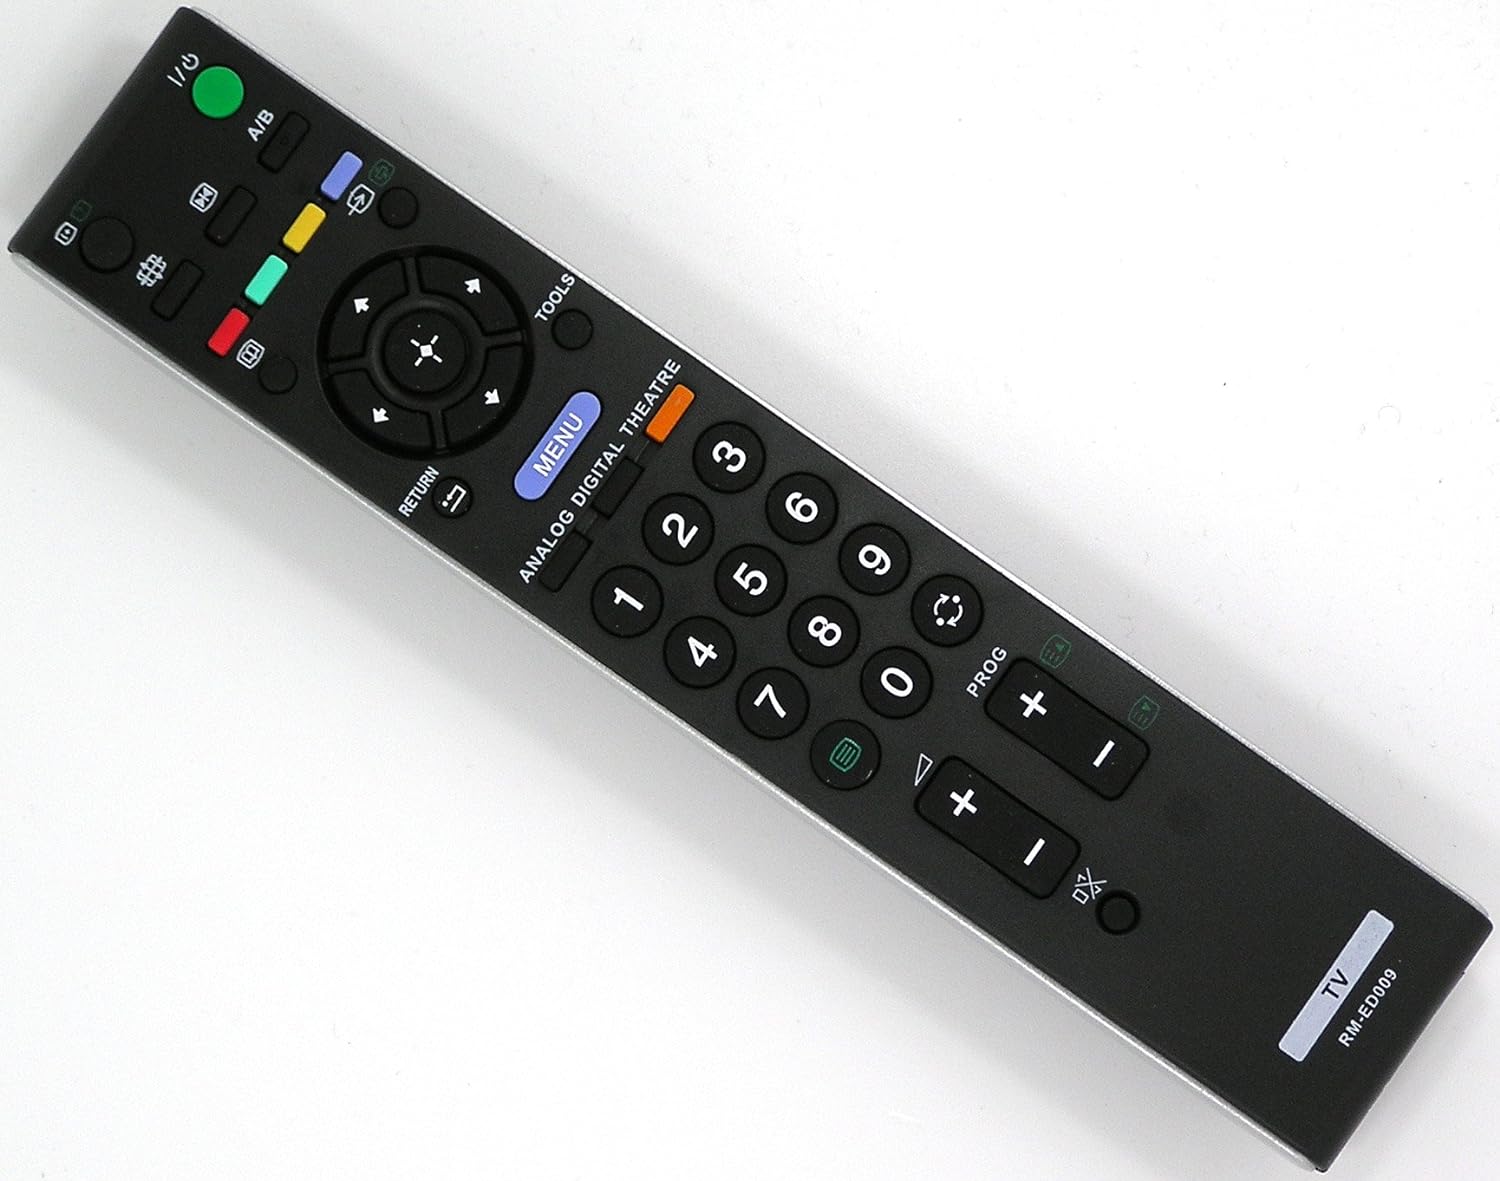 Replacement of TV remote batteries and checking button functionality.